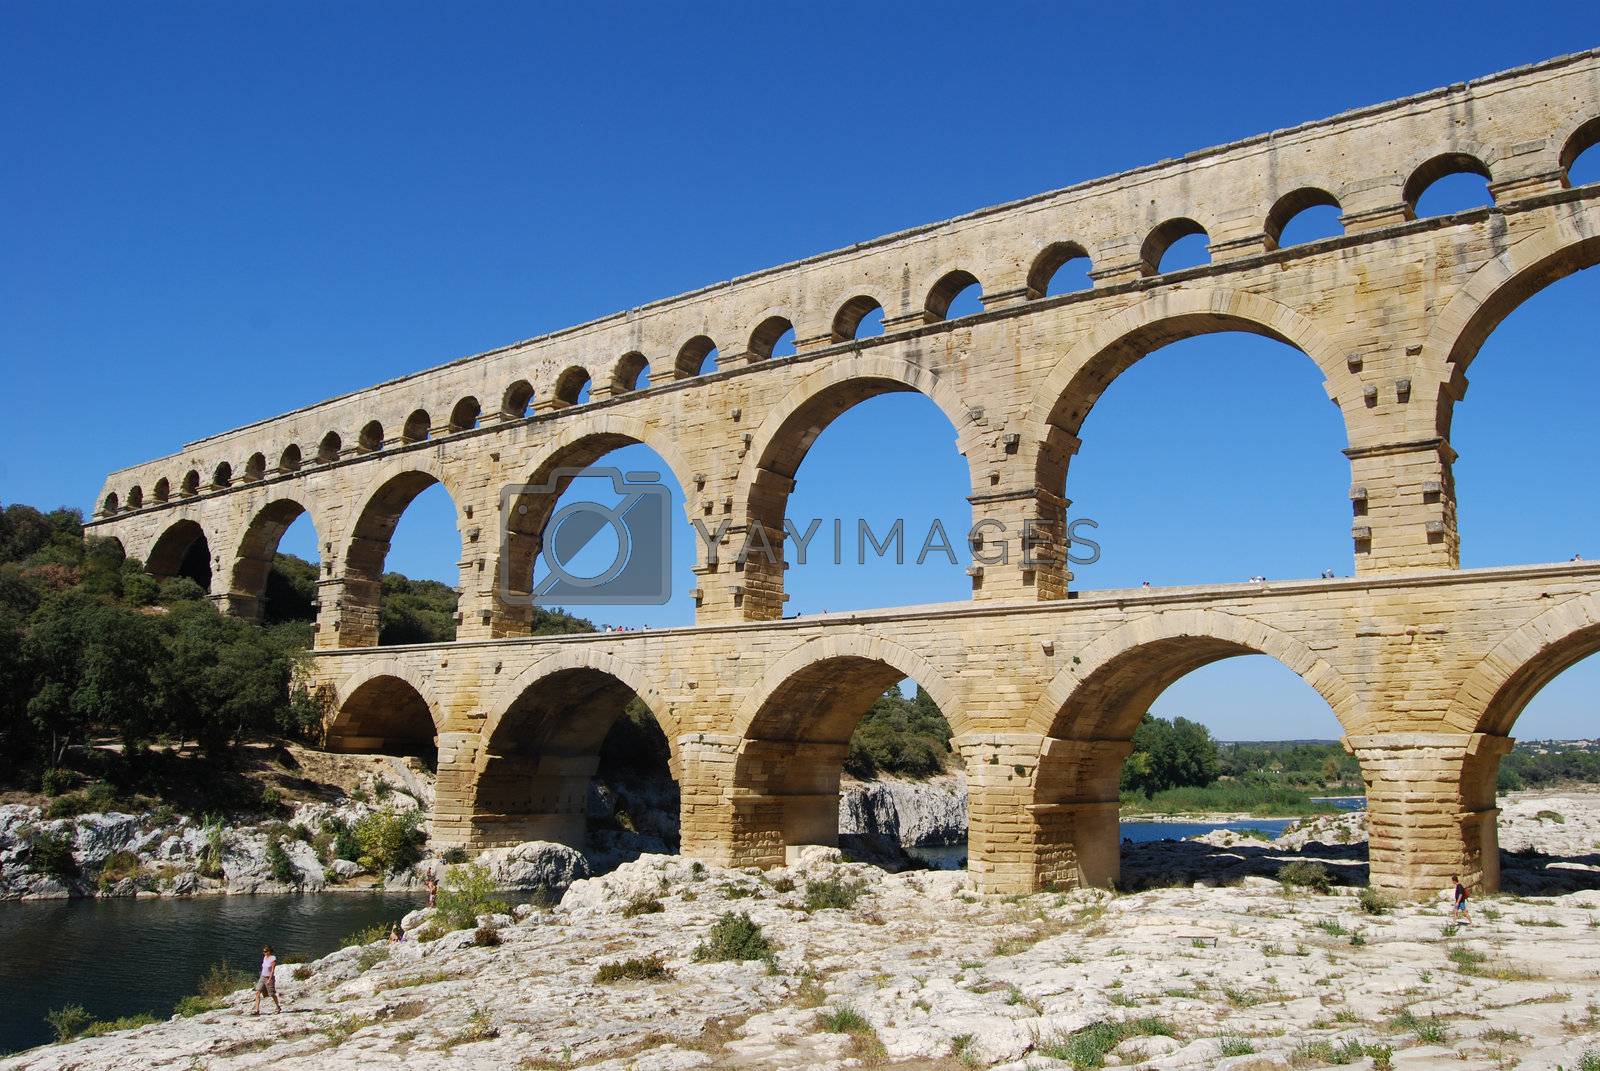 Royalty free image of Pont du gard by windmill